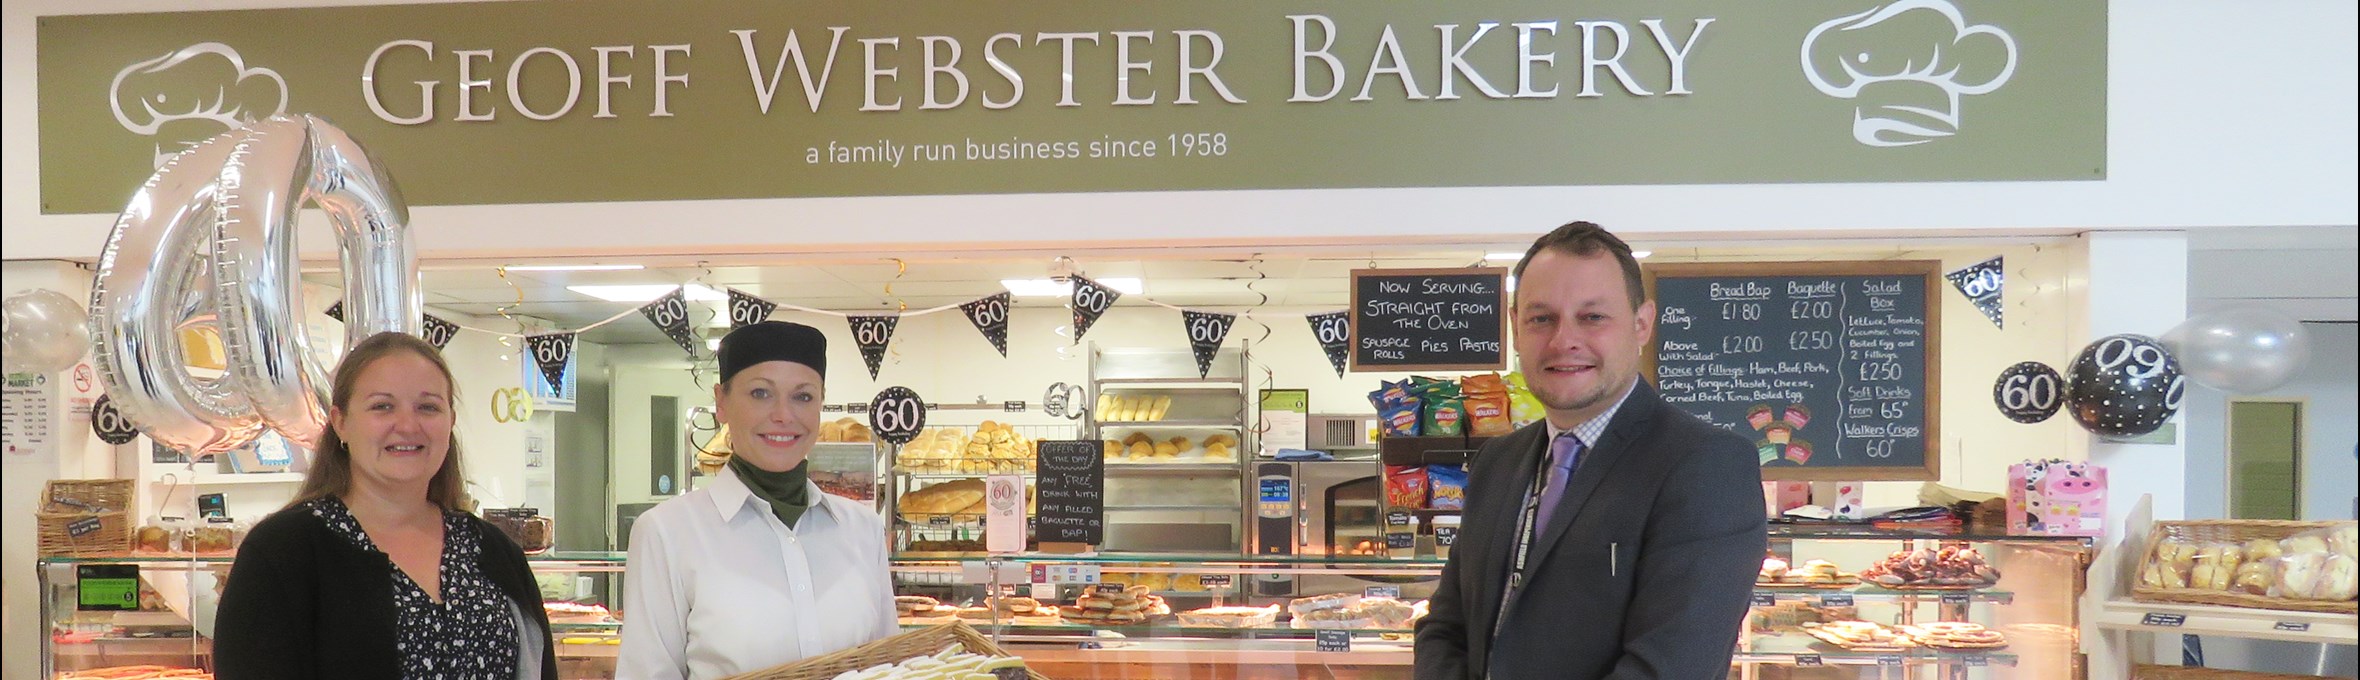 cllrs stand outside Geoff Webster Bakery in Idlewells Indoor Market 